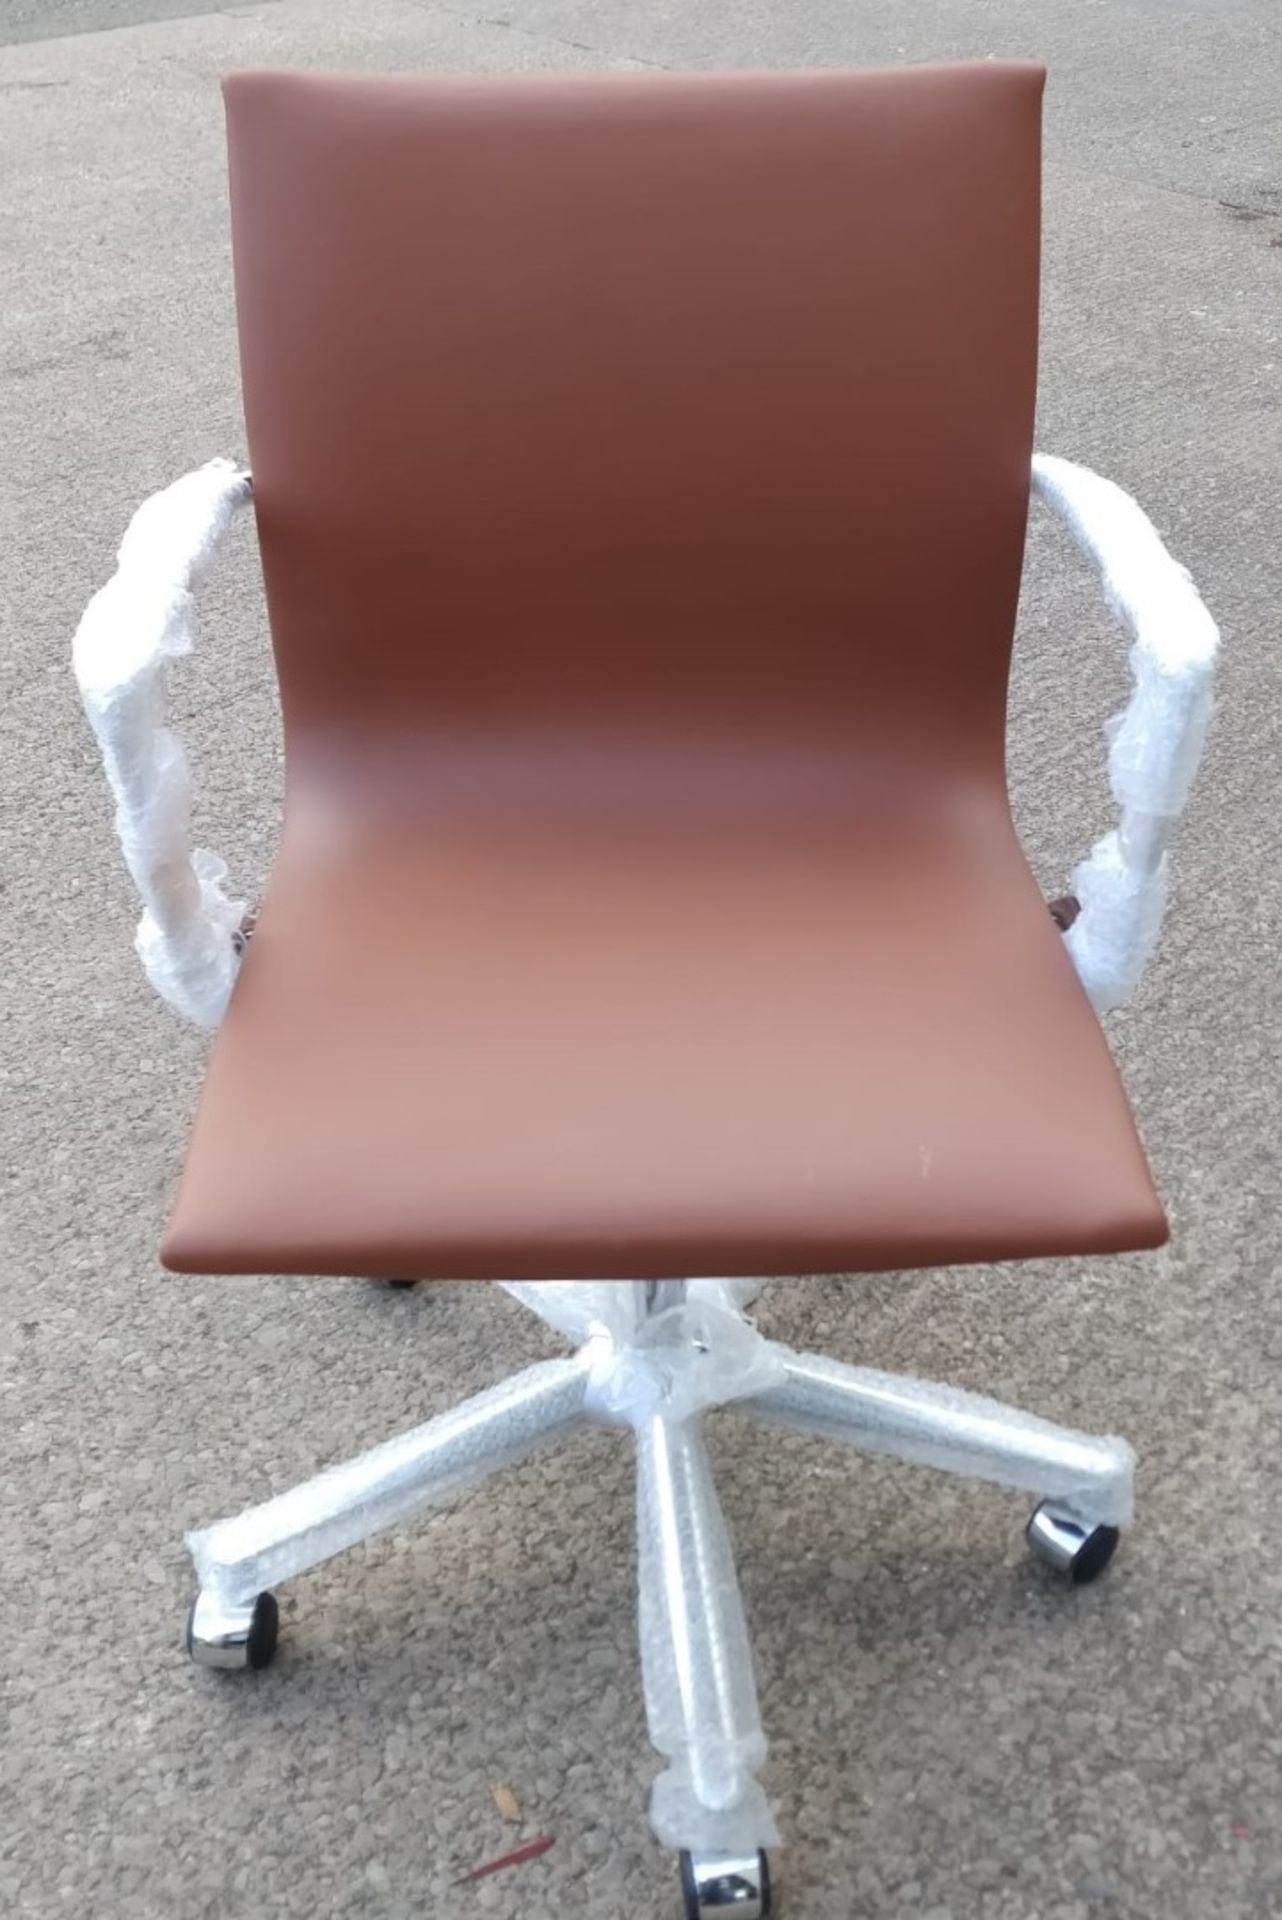 1 x LINEAR Eames-Inspired Low Back Office Swivel Chair In TAN Leather - Brand New Boxed Stock - - Image 2 of 6